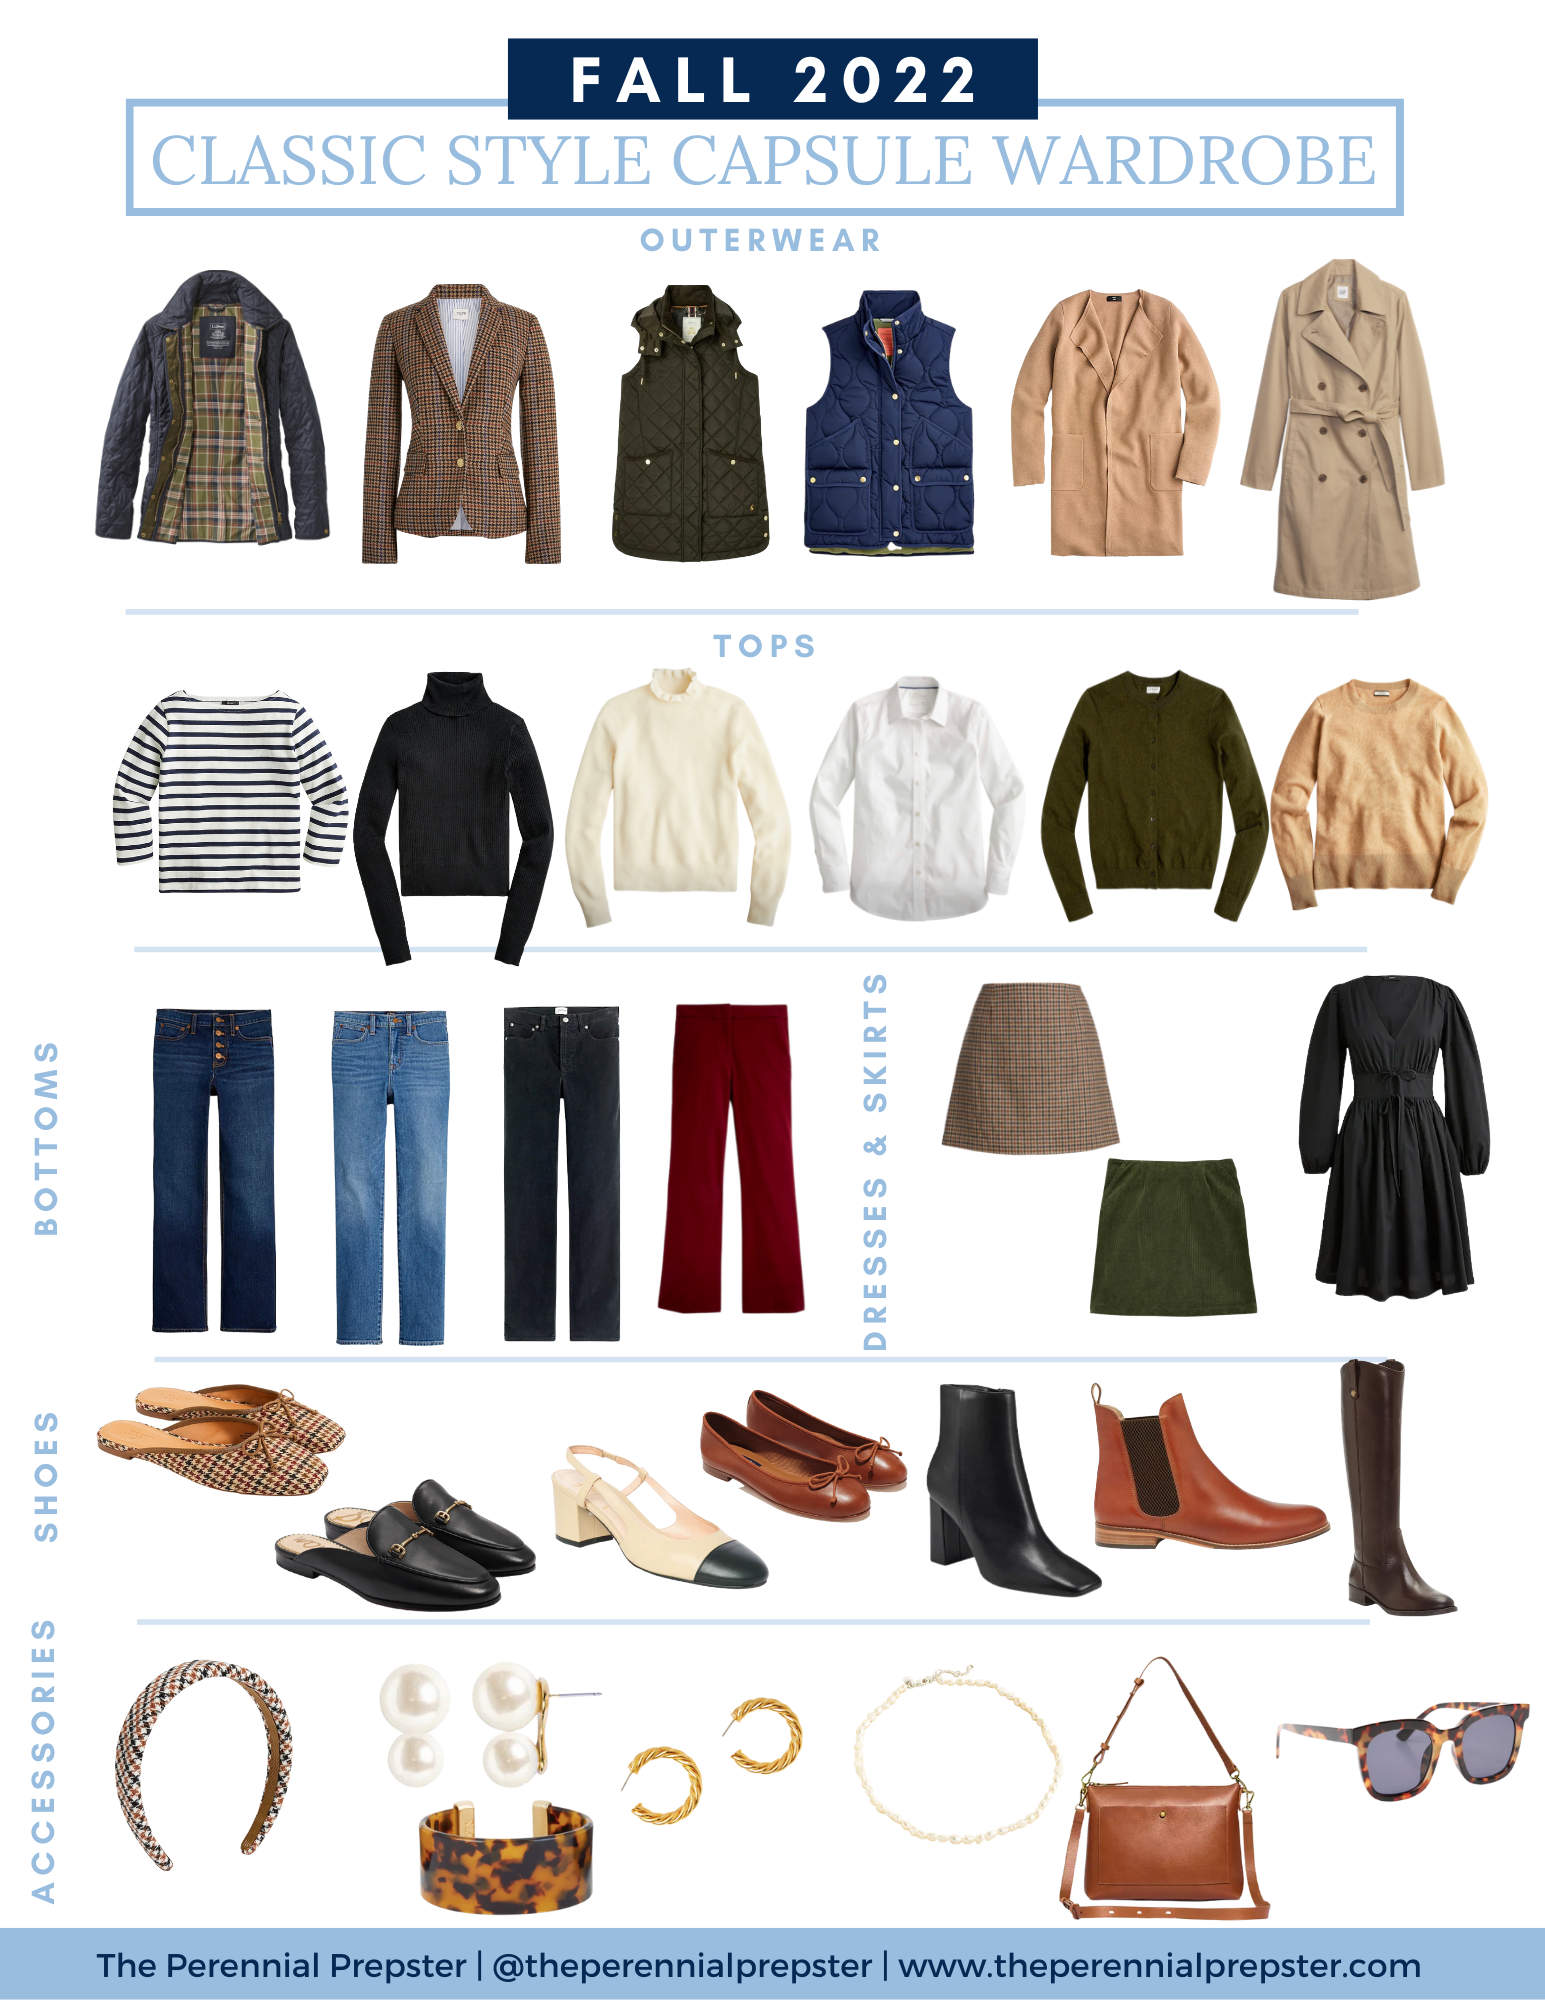 Classic Capsule Wardrobe for Fall - The Perennial Prepster